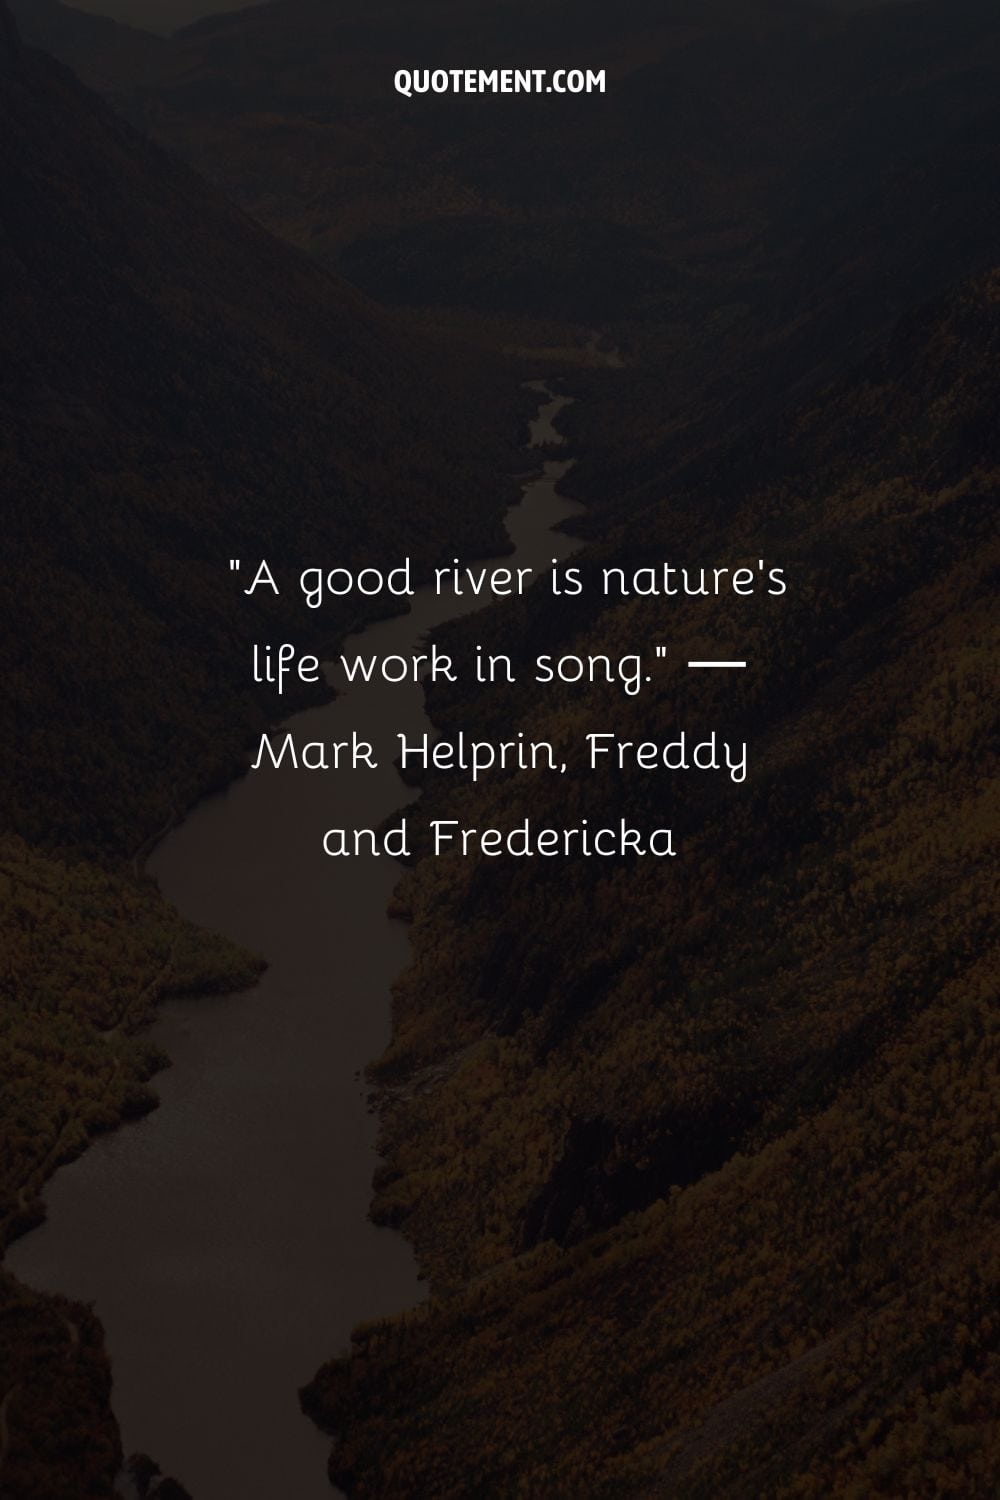 River's journey through mountain wilderness representing quote on river